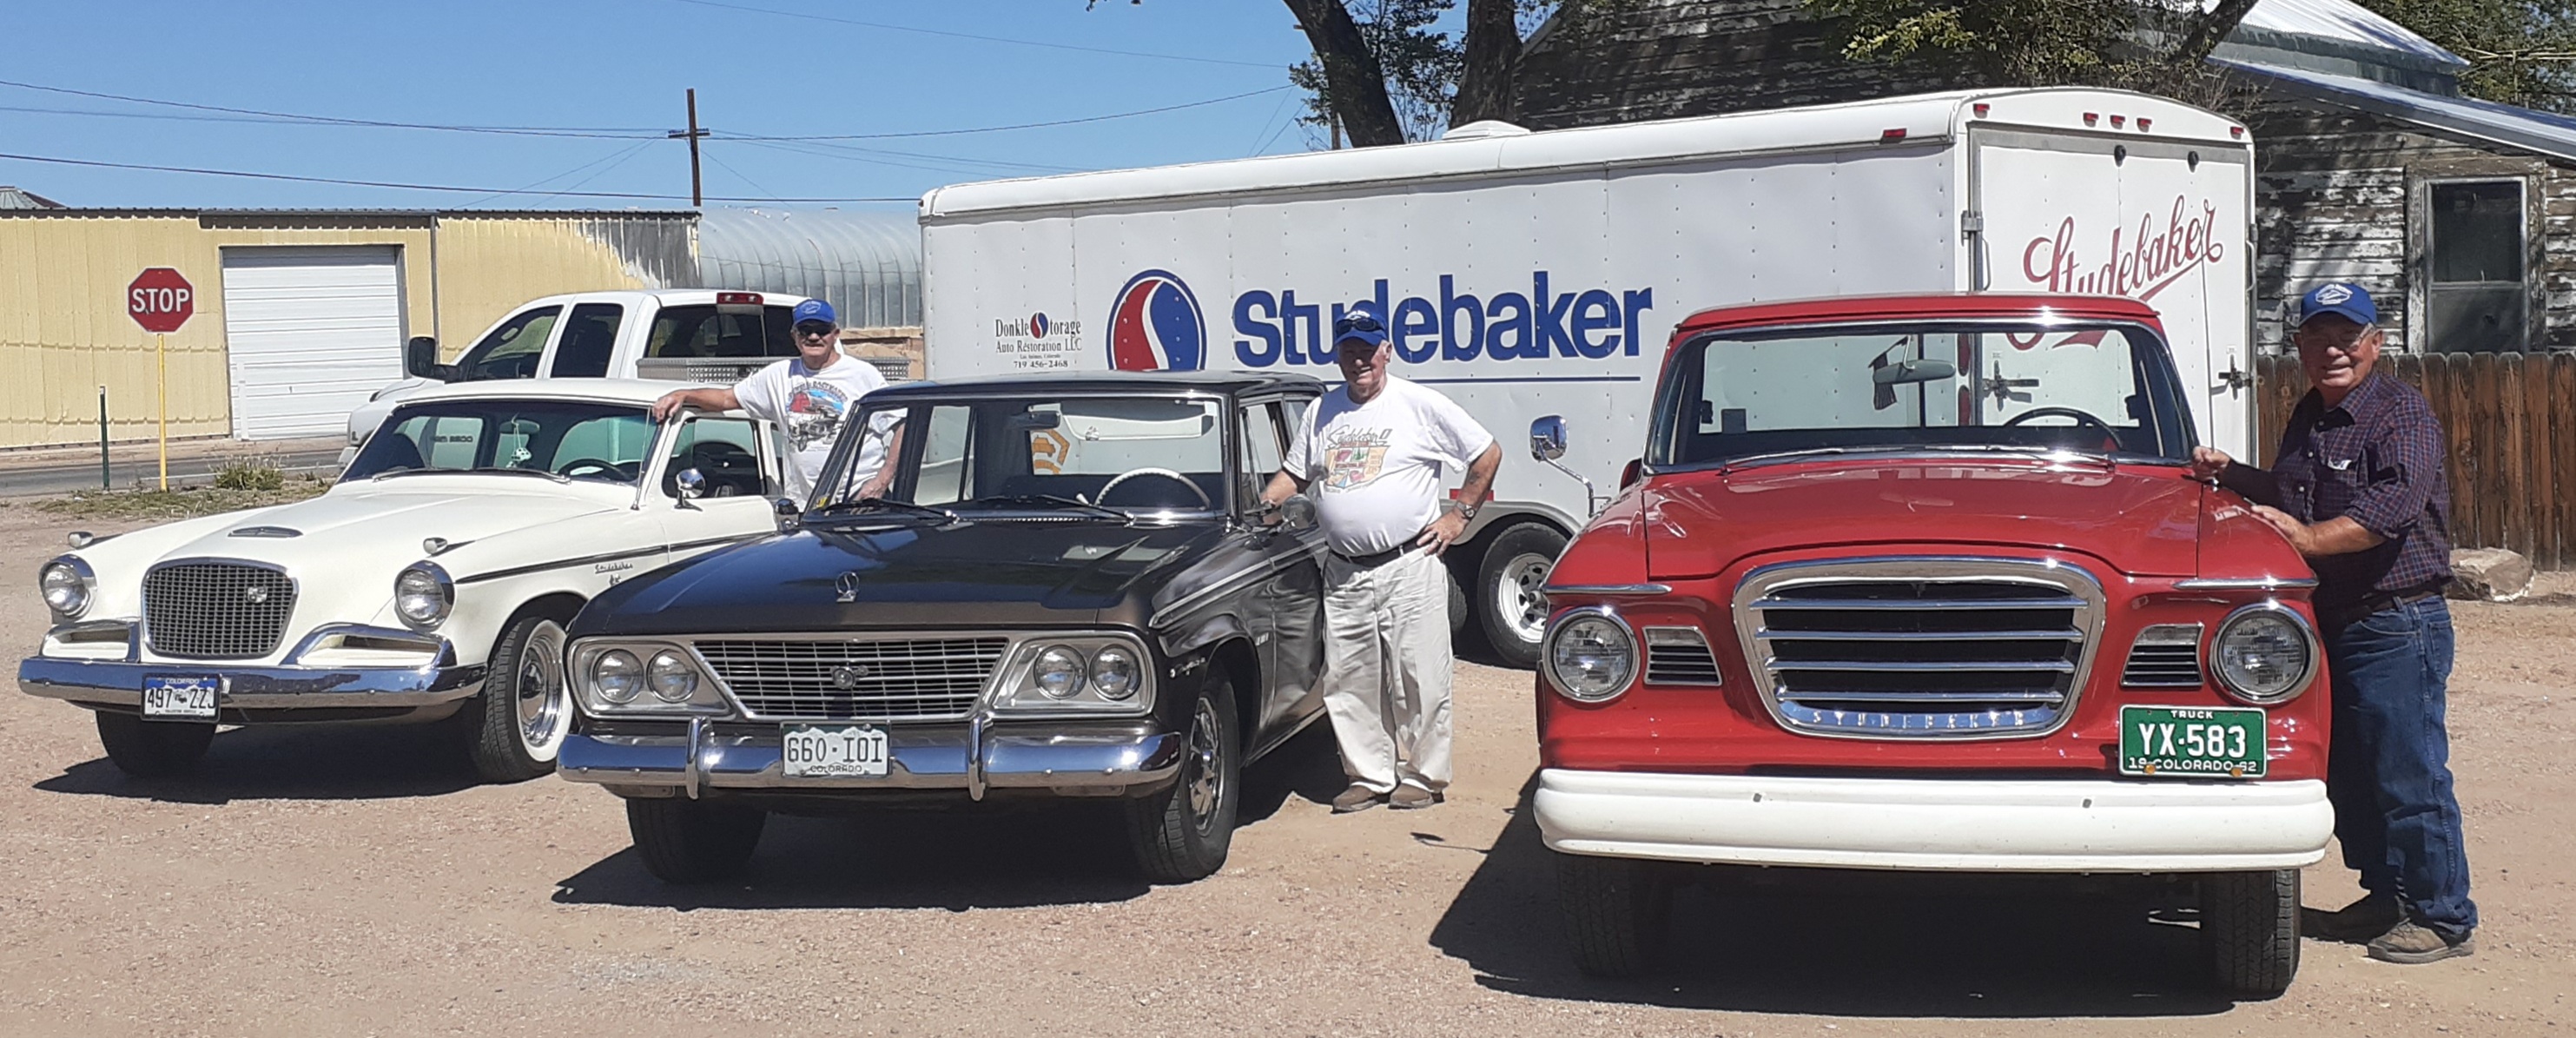 National Drive Your Studebaker Day seconews.org 